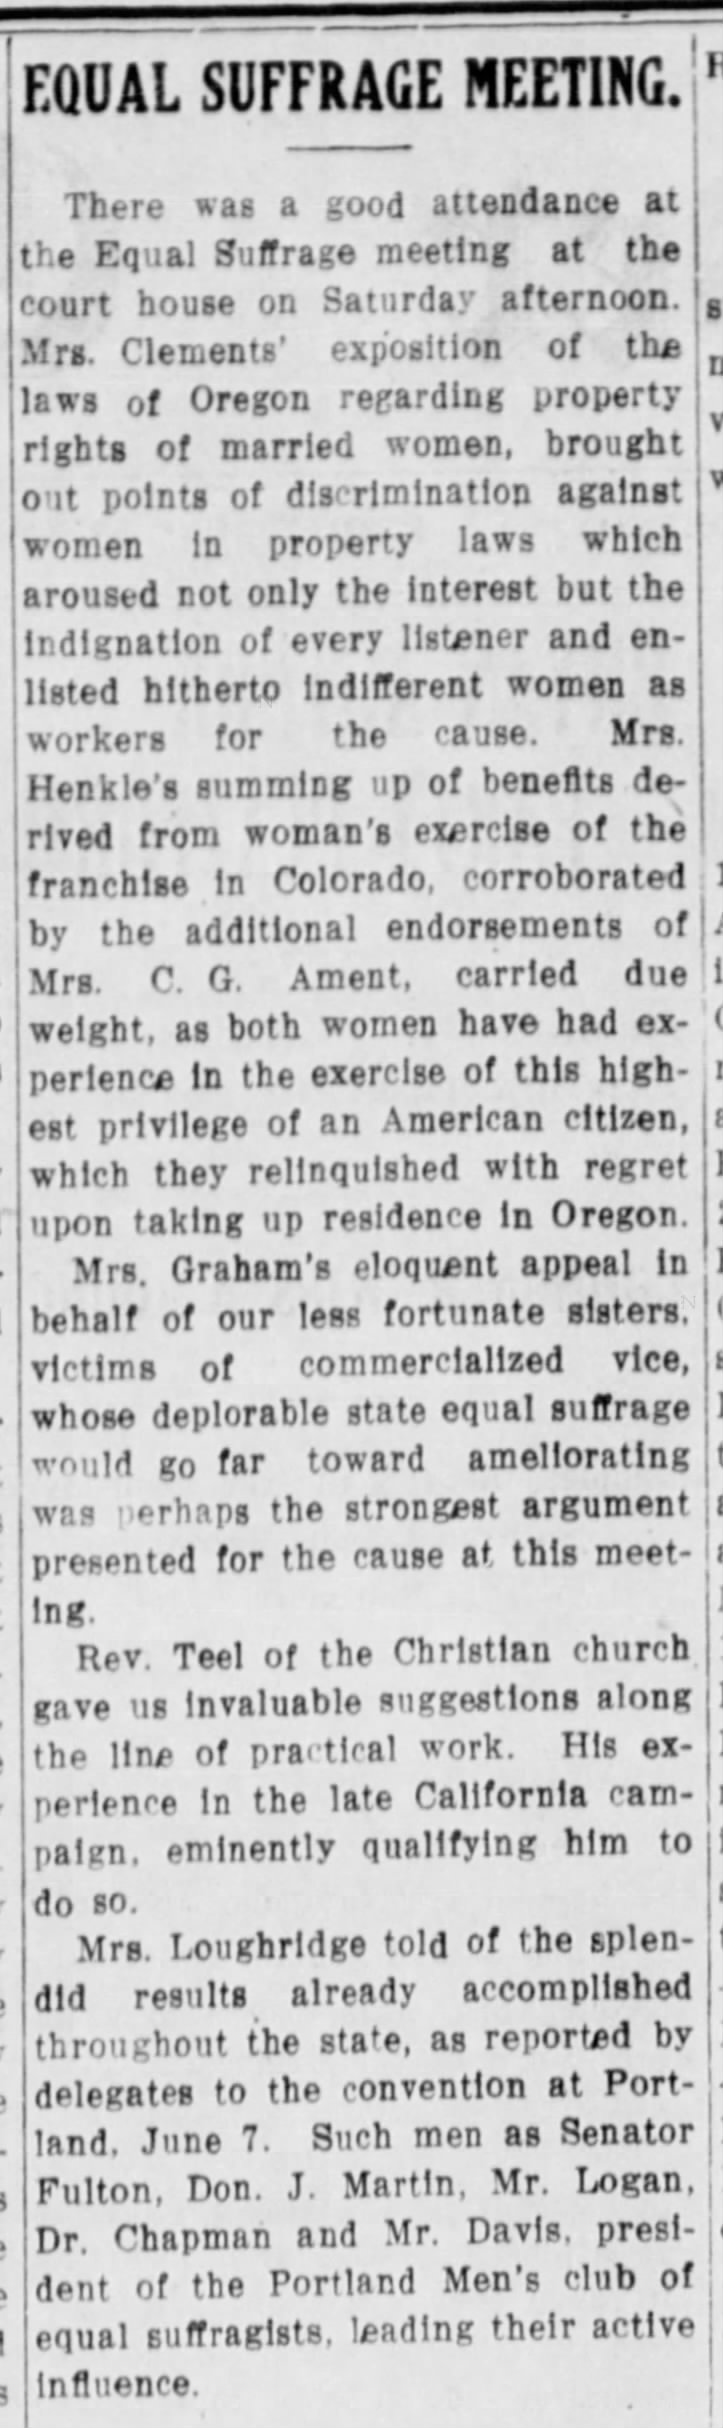 Weekly Rogue River Courier (Grants Pass, OR) 28 Jun 1912 p2 c3